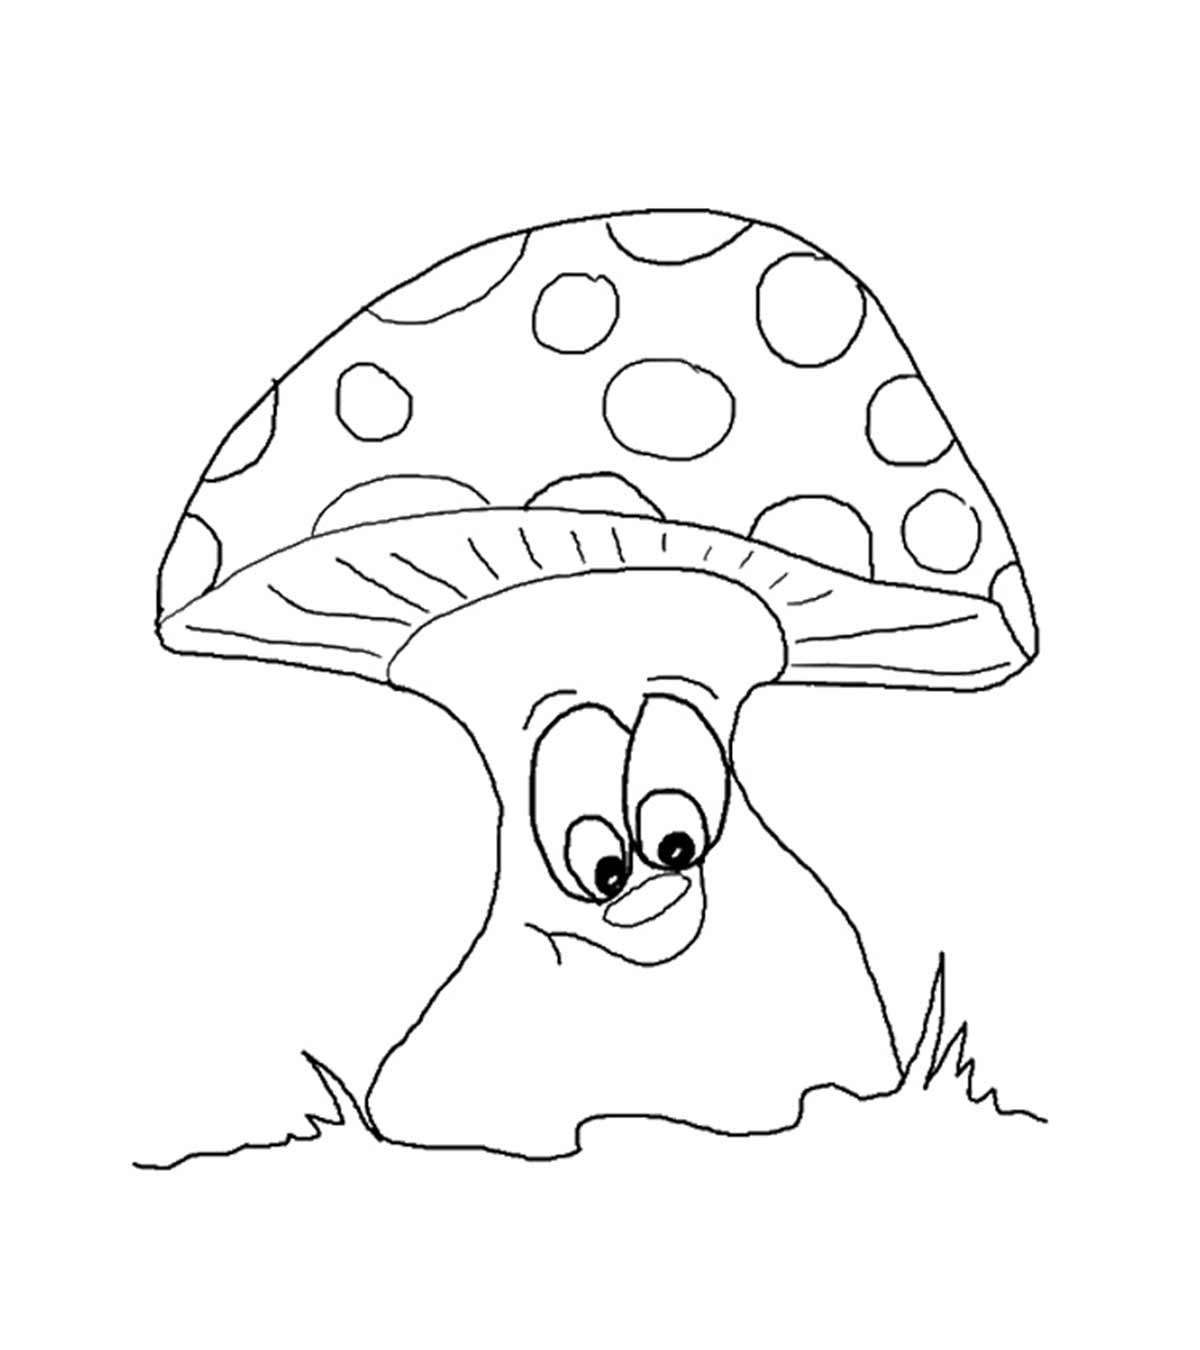 25 Best Mushroom Coloring Pages Your Toddler Will Love To Color